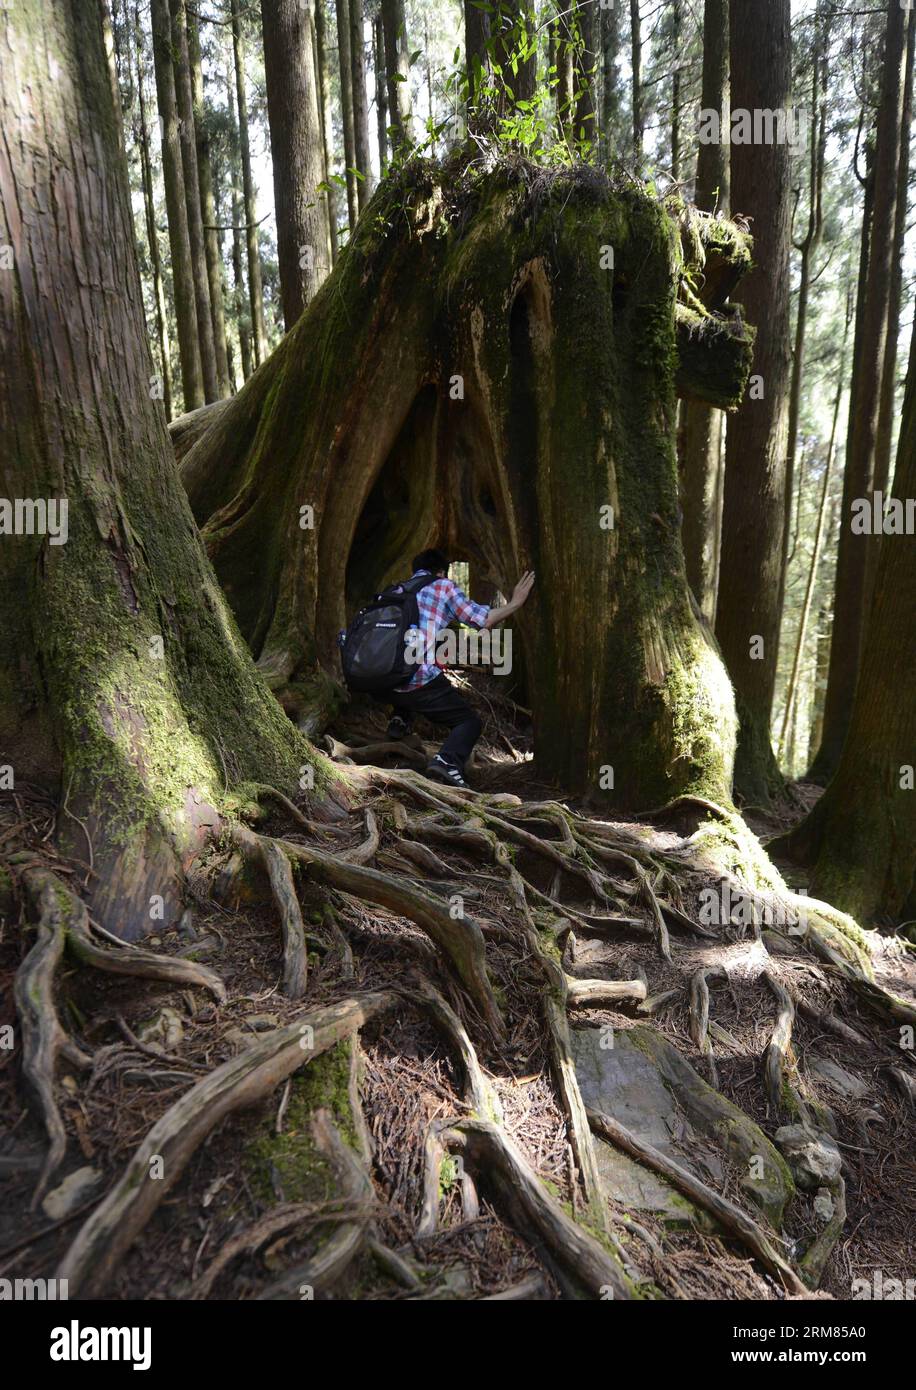 (140328) -- CHIAYI, March 28, 2014 (Xinhua) -- A tourist visits a Formosan cypress forest in the Ali Mountain in Chiayi County, southeast China s Taiwan, March 28, 2014. The Ali Mountain in central Taiwan is home to an abundance of Formosan cypresses (Chamaecyparis formosensis), which are an endemic species. During Taiwan s Japanese occupation period (1895-1945), the Formosan cypresses of the Ali Mountain were shipped to Japan in substantial amounts for architectural use. Still, a considerable number of them outlived the Japanese looting and natural disasters. (Xinhua/Huang Xiaoyong) (lmm) CHI Stock Photo